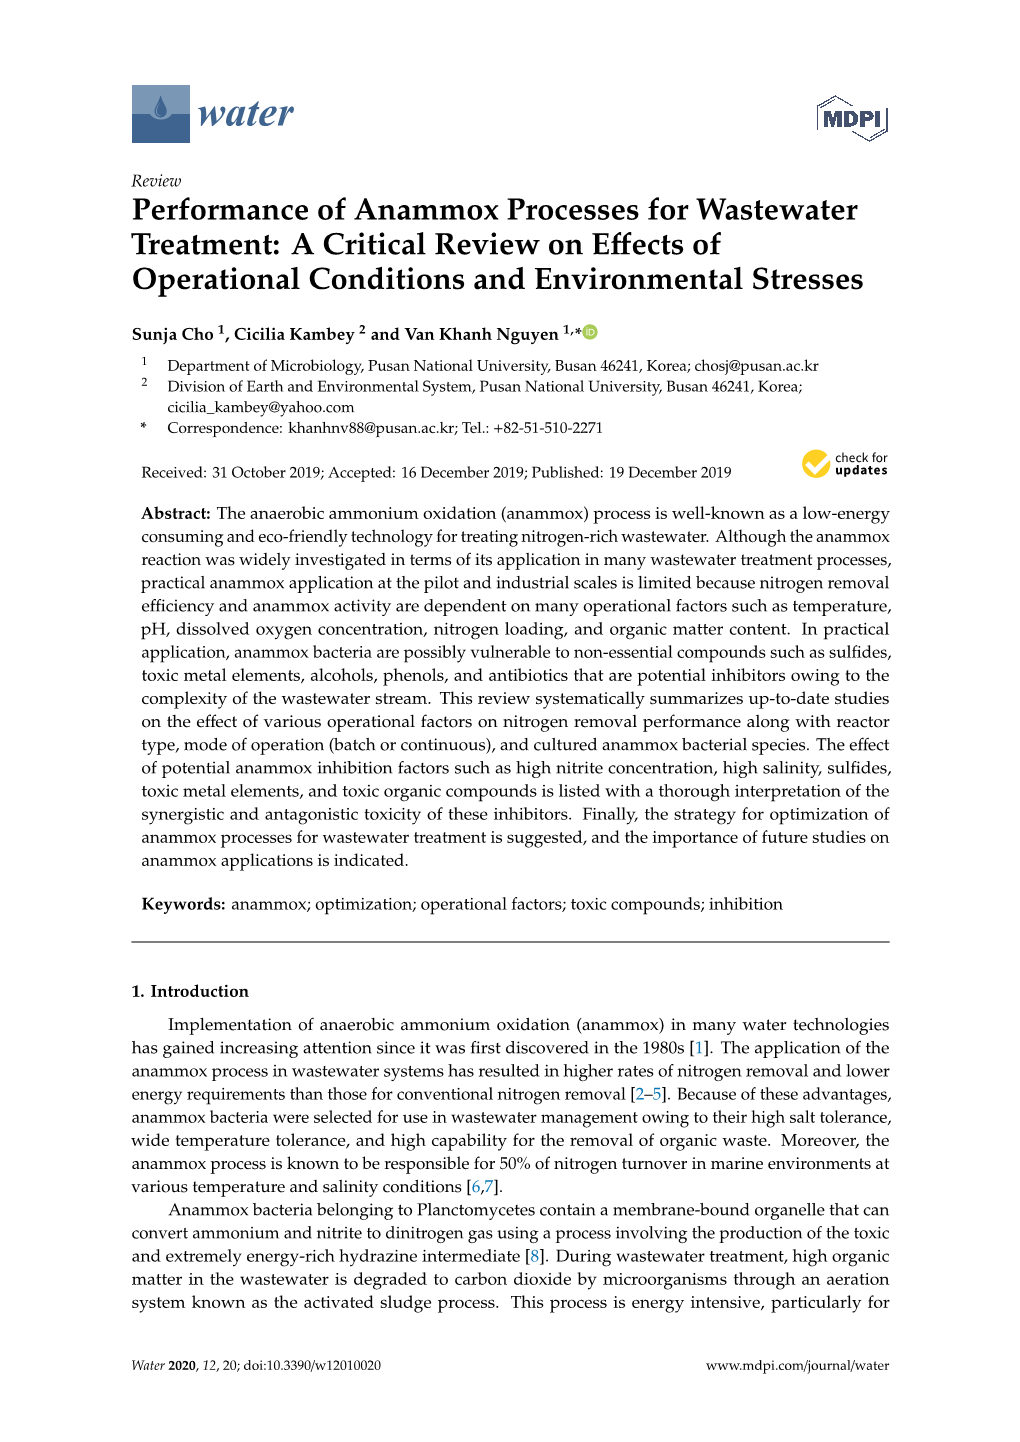 Performance of Anammox Processes for Wastewater Treatment: a Critical Review on Eﬀects of Operational Conditions and Environmental Stresses